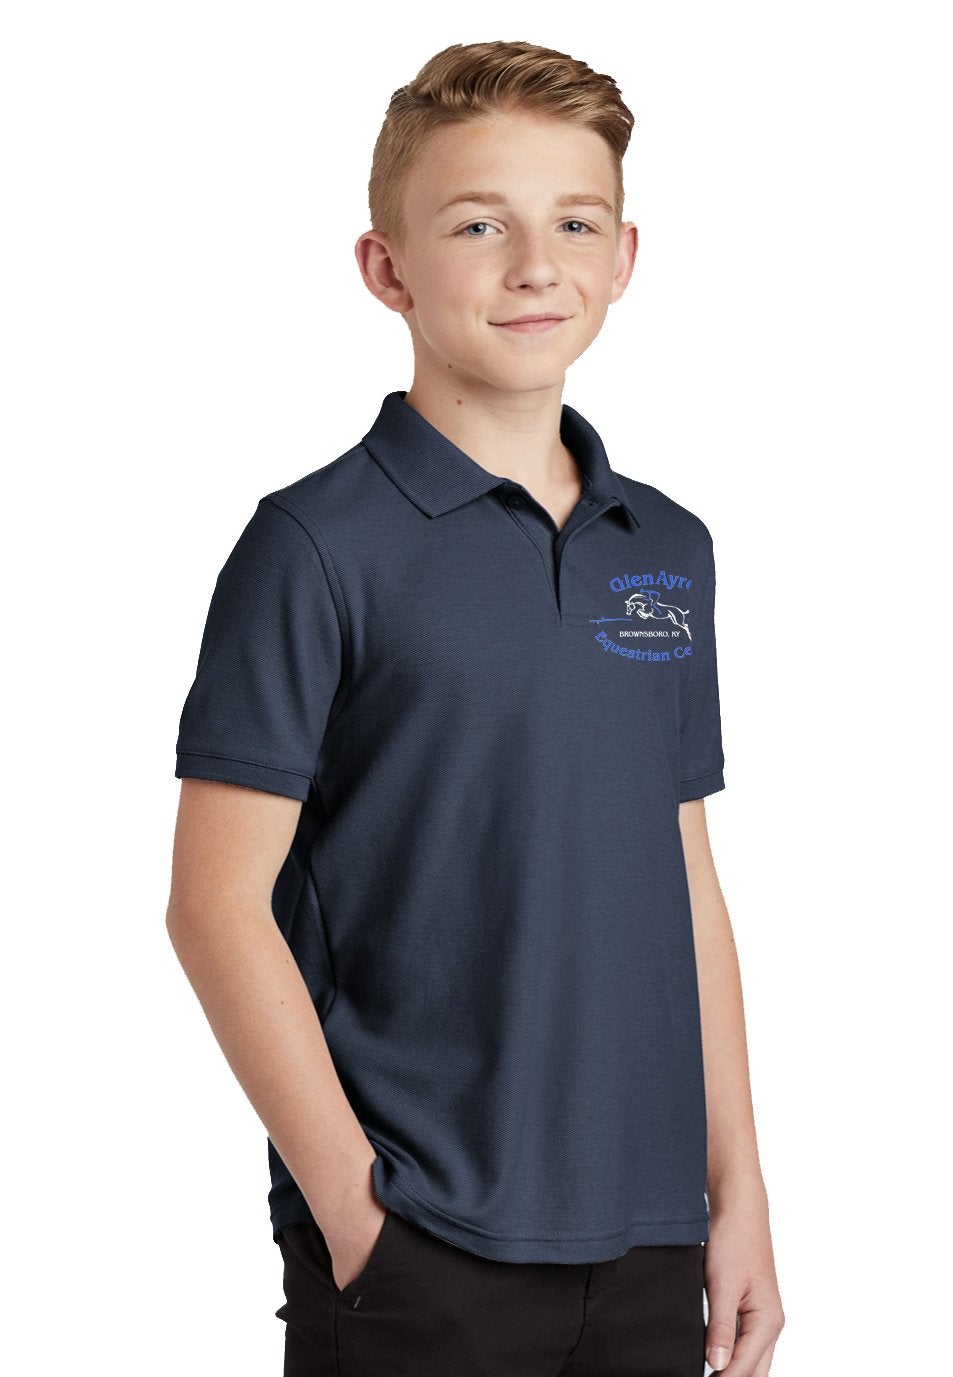 GlenAyre Equestrian Youth Classic Pique Polo - Navy